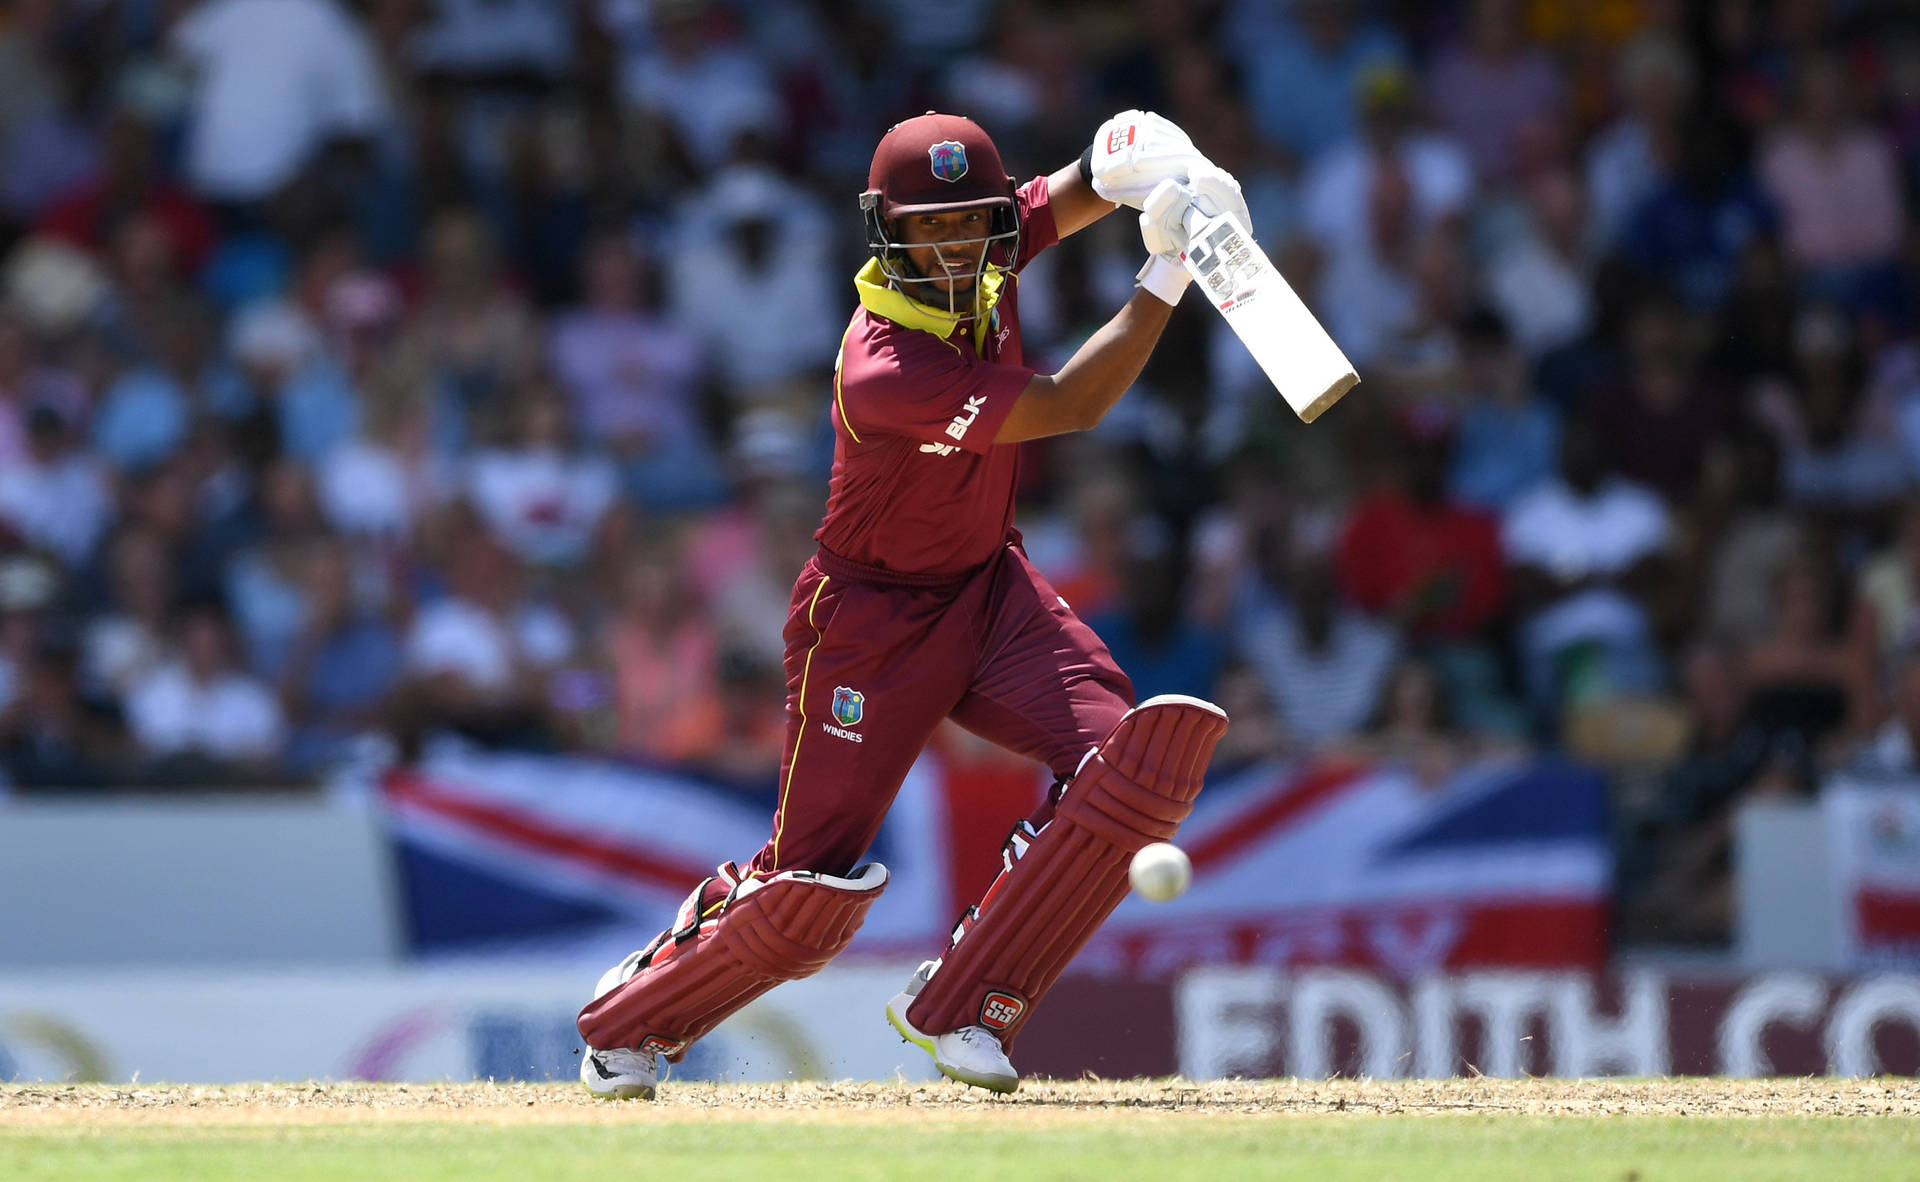 Dominant Shai Hope in Fiery Red Wallpaper